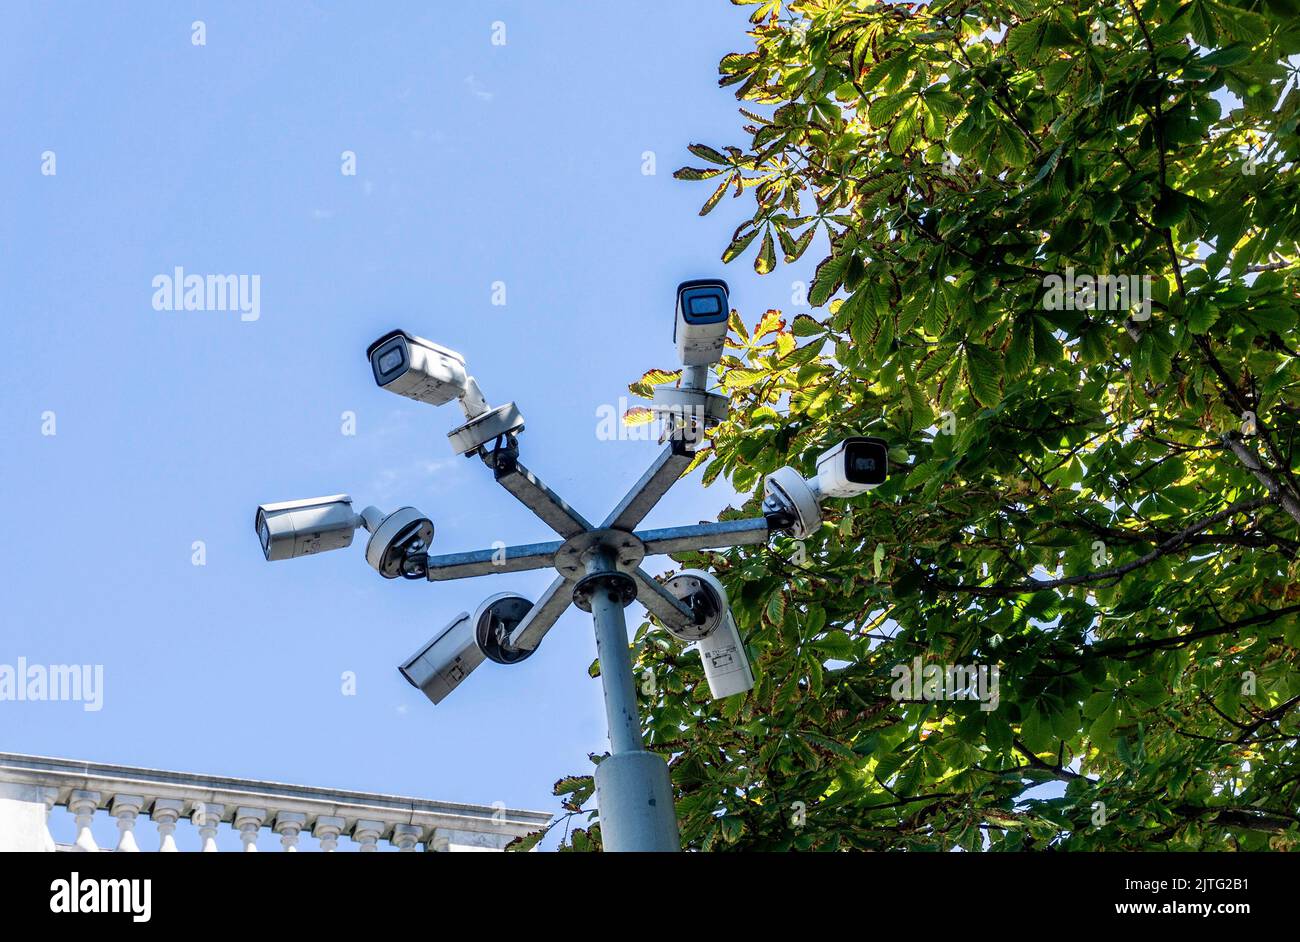 Big brother is watching you. A group of six cctv cameras watching all aspects of an area. Stock Photo